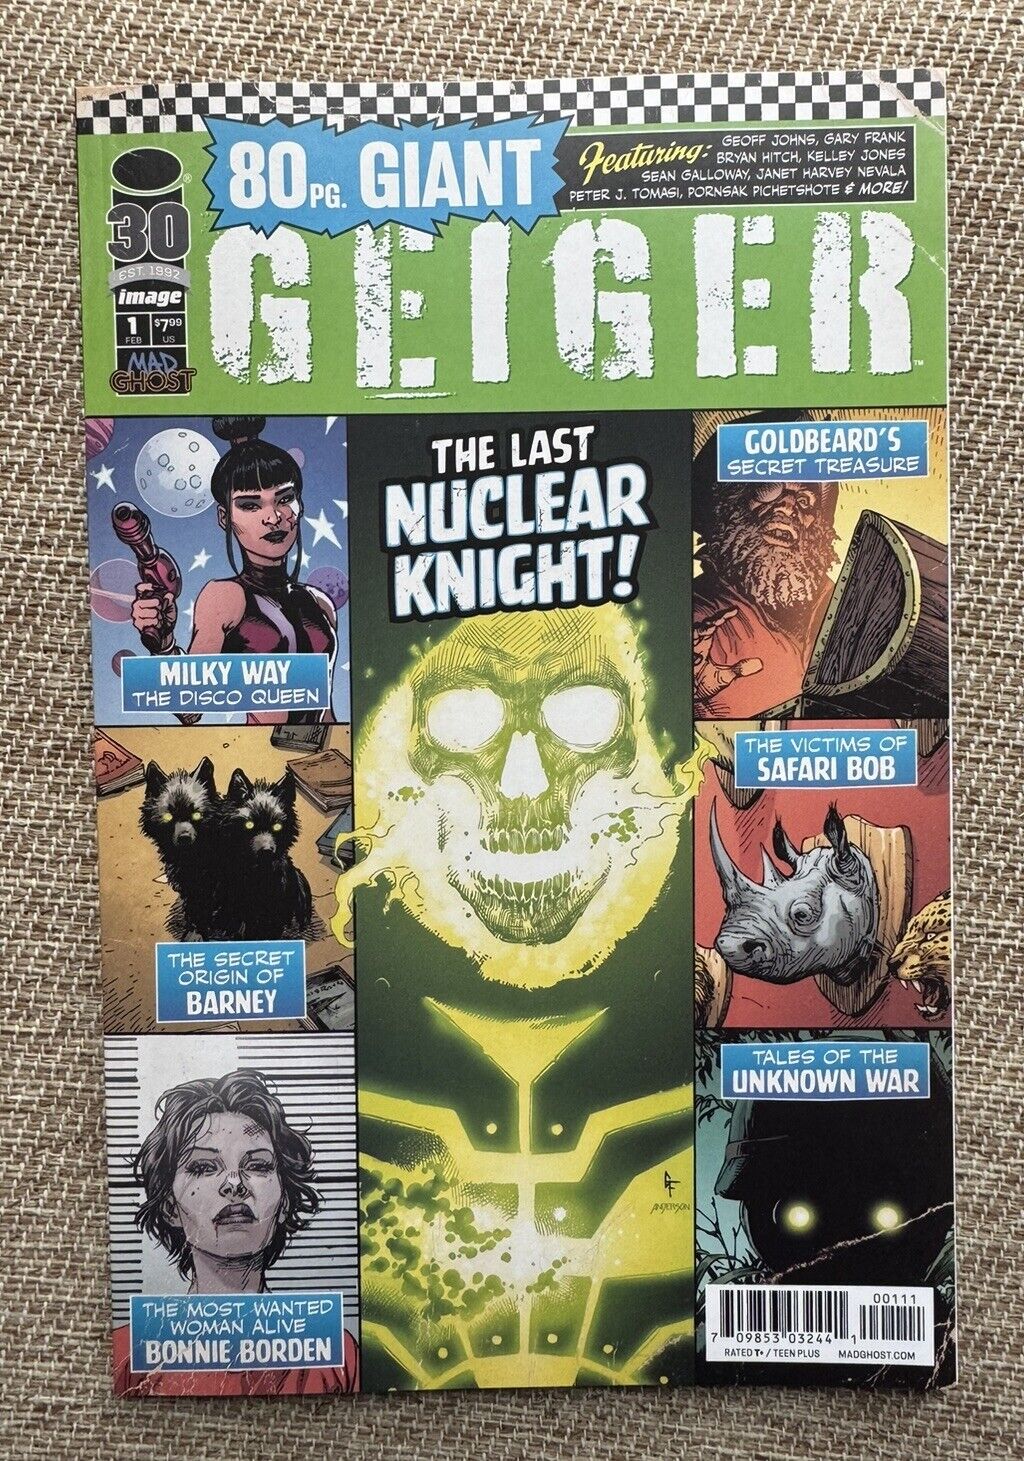 Geiger 80 Page Giant #1 Cover A